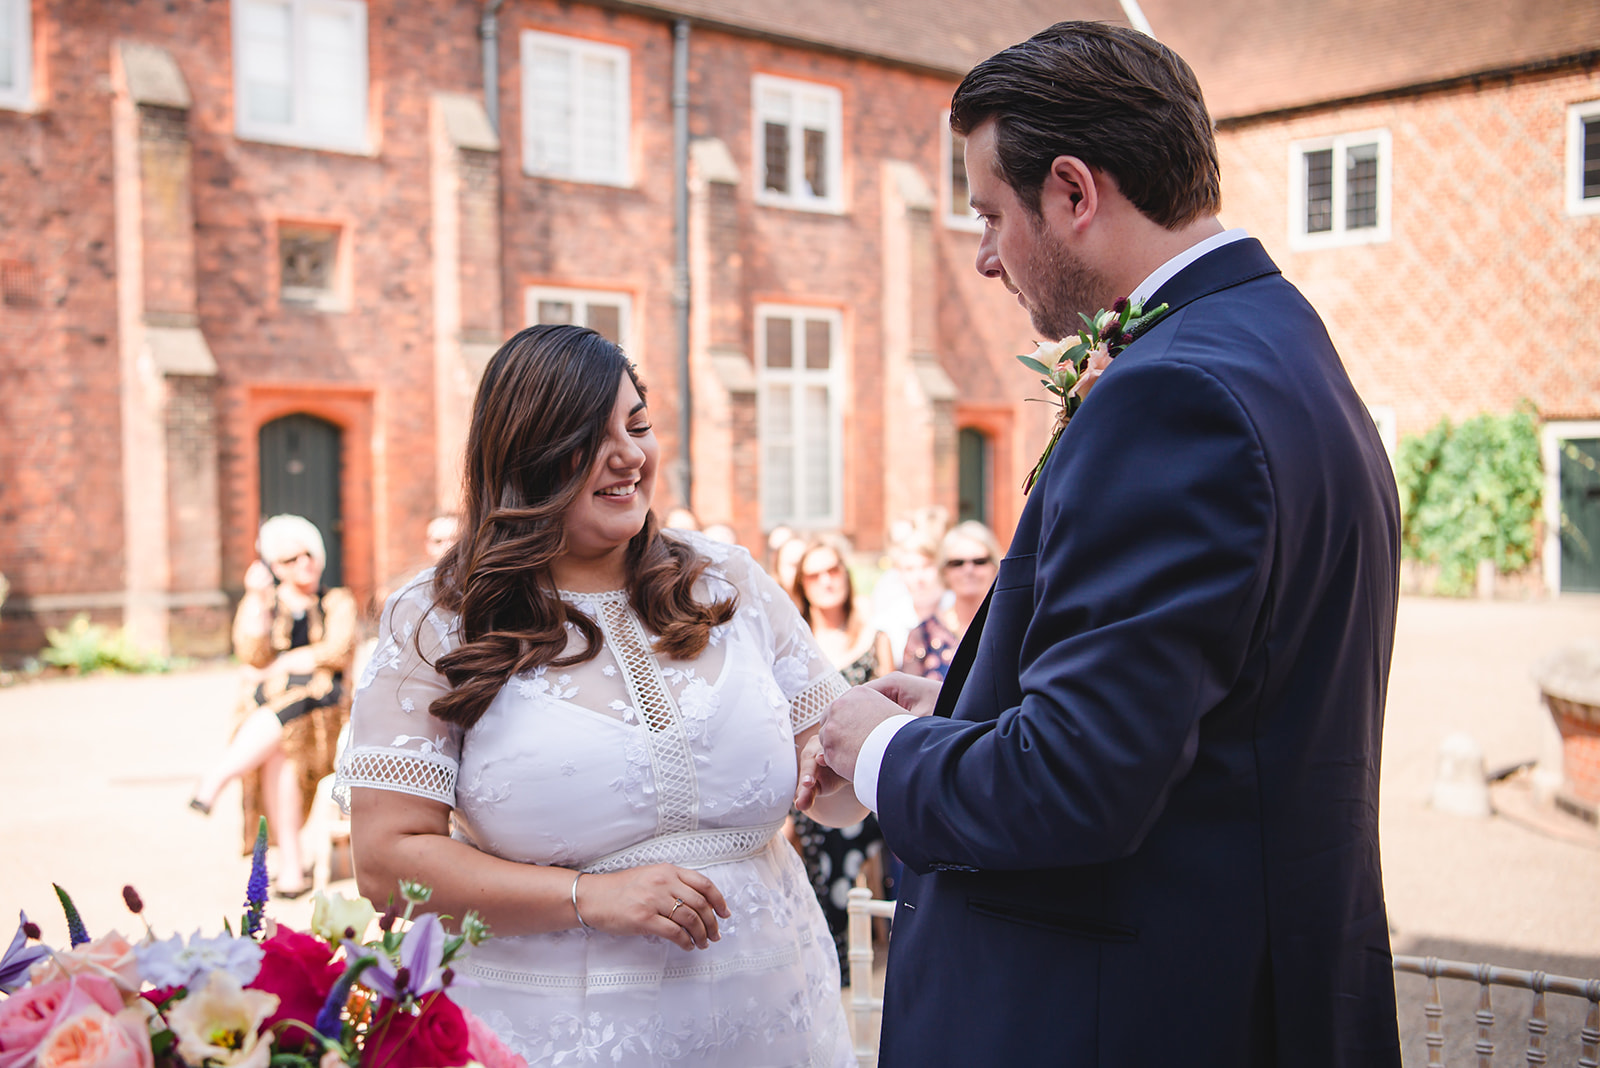 Nikita and Chris's  ring exchange during the wedding ceremony at the Fulham Palace